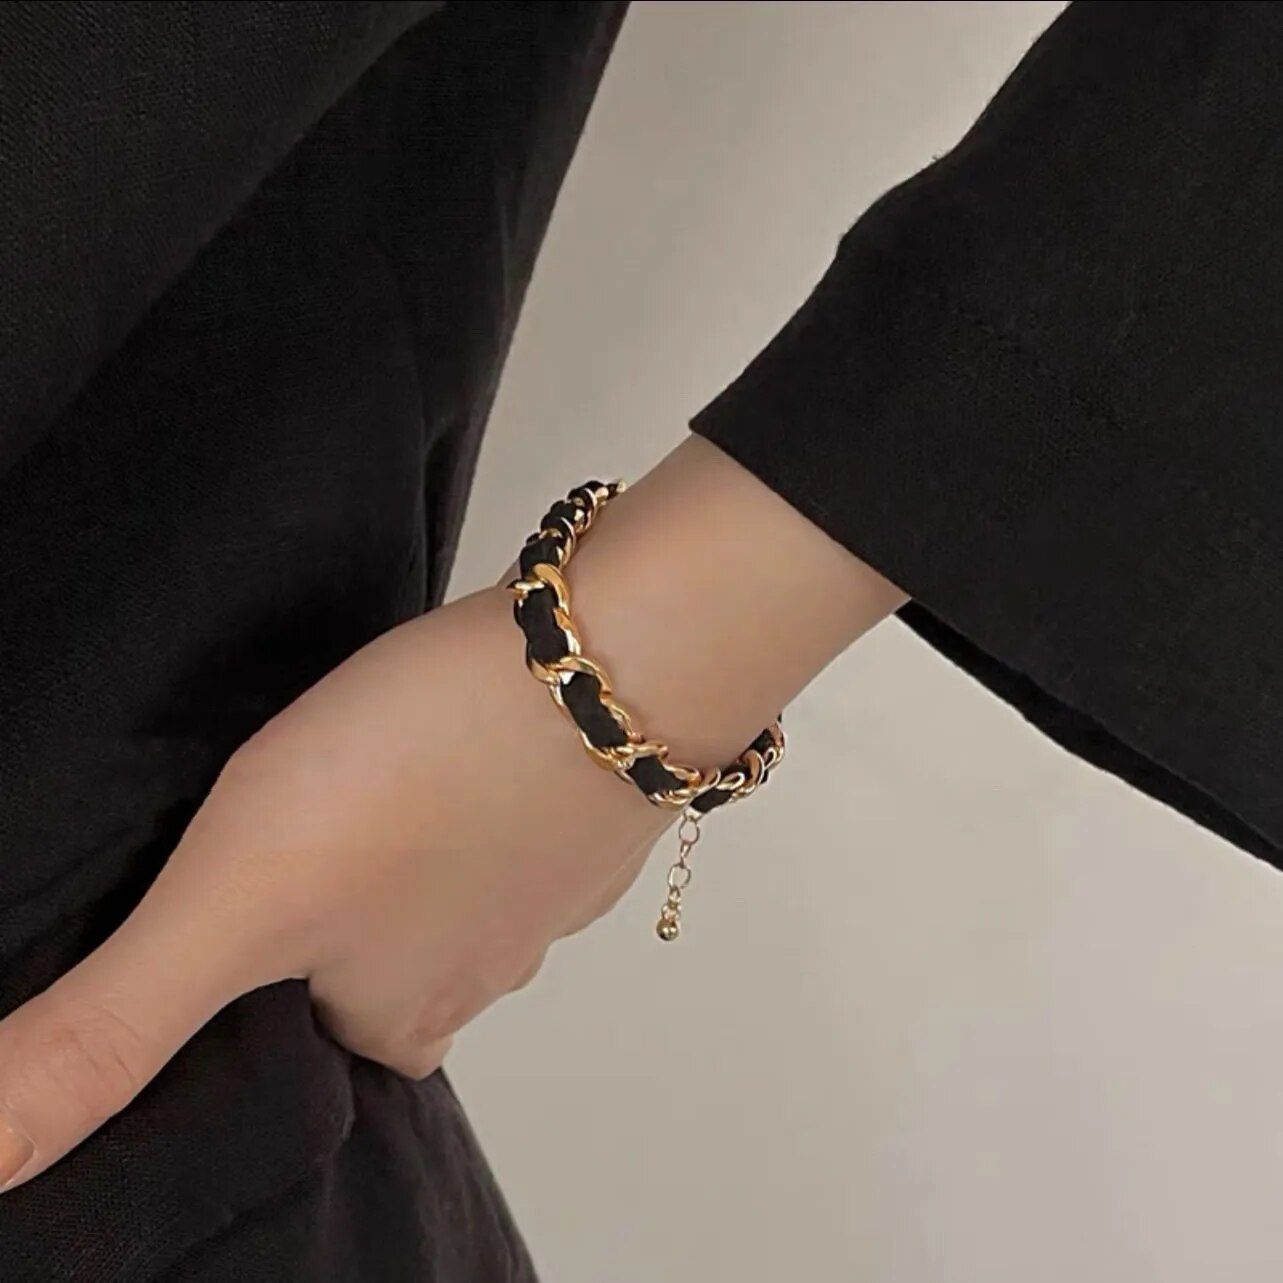 A person wearing an Elegant Vintage Rose Gold Black Woven Bracelet on their wrist against a backdrop of dark clothing, embodying the latest fashion trends.